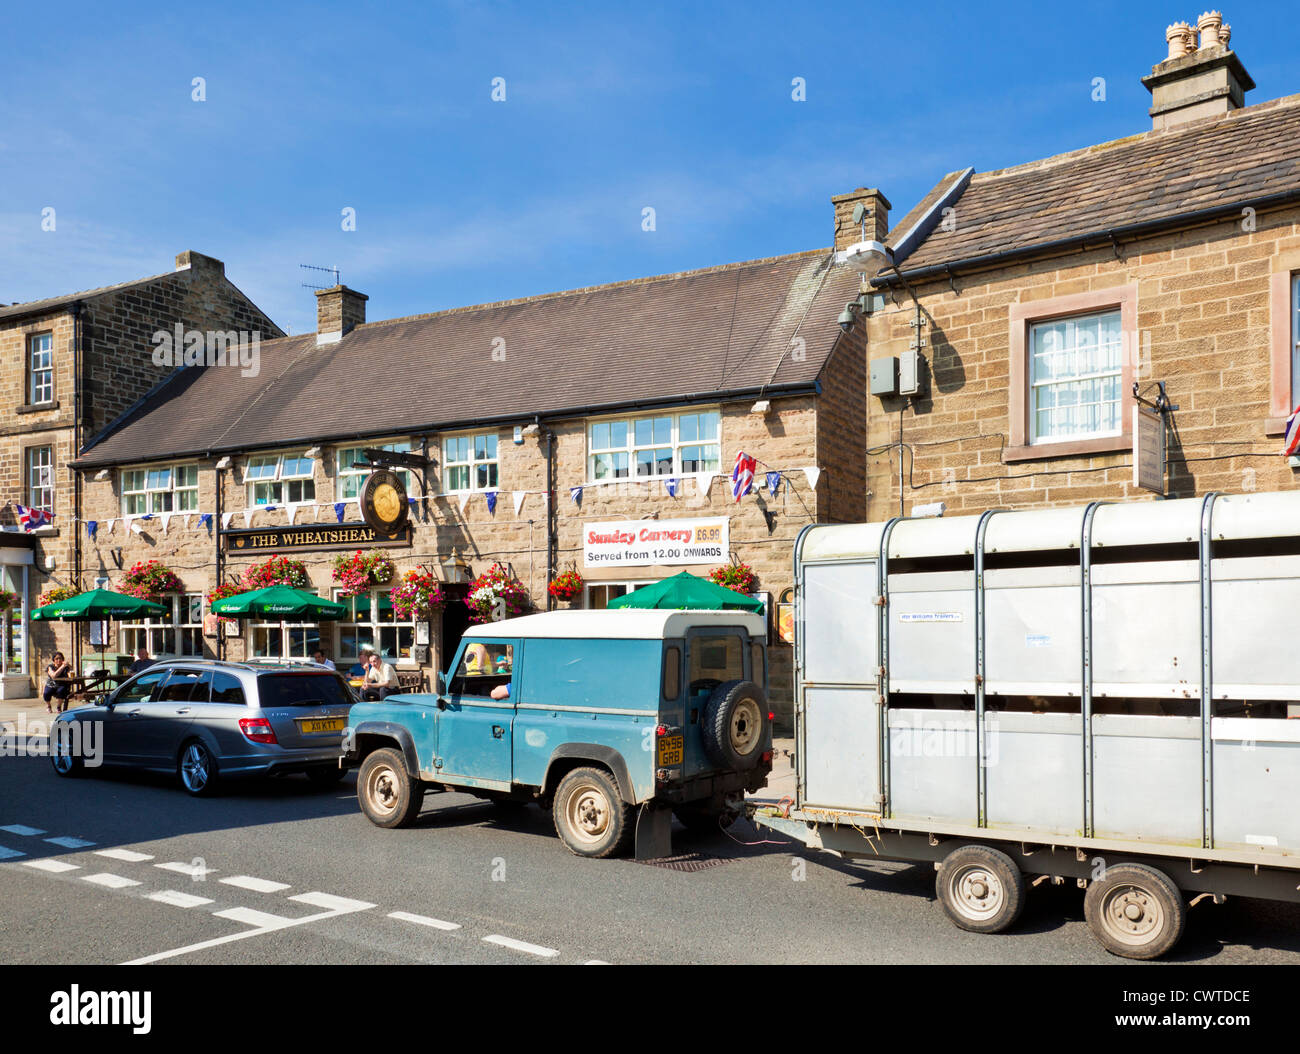 Bakewell town centre traffic with a farmer on his way to market Derbyshire Peak District England UK GB EU Europe Stock Photo